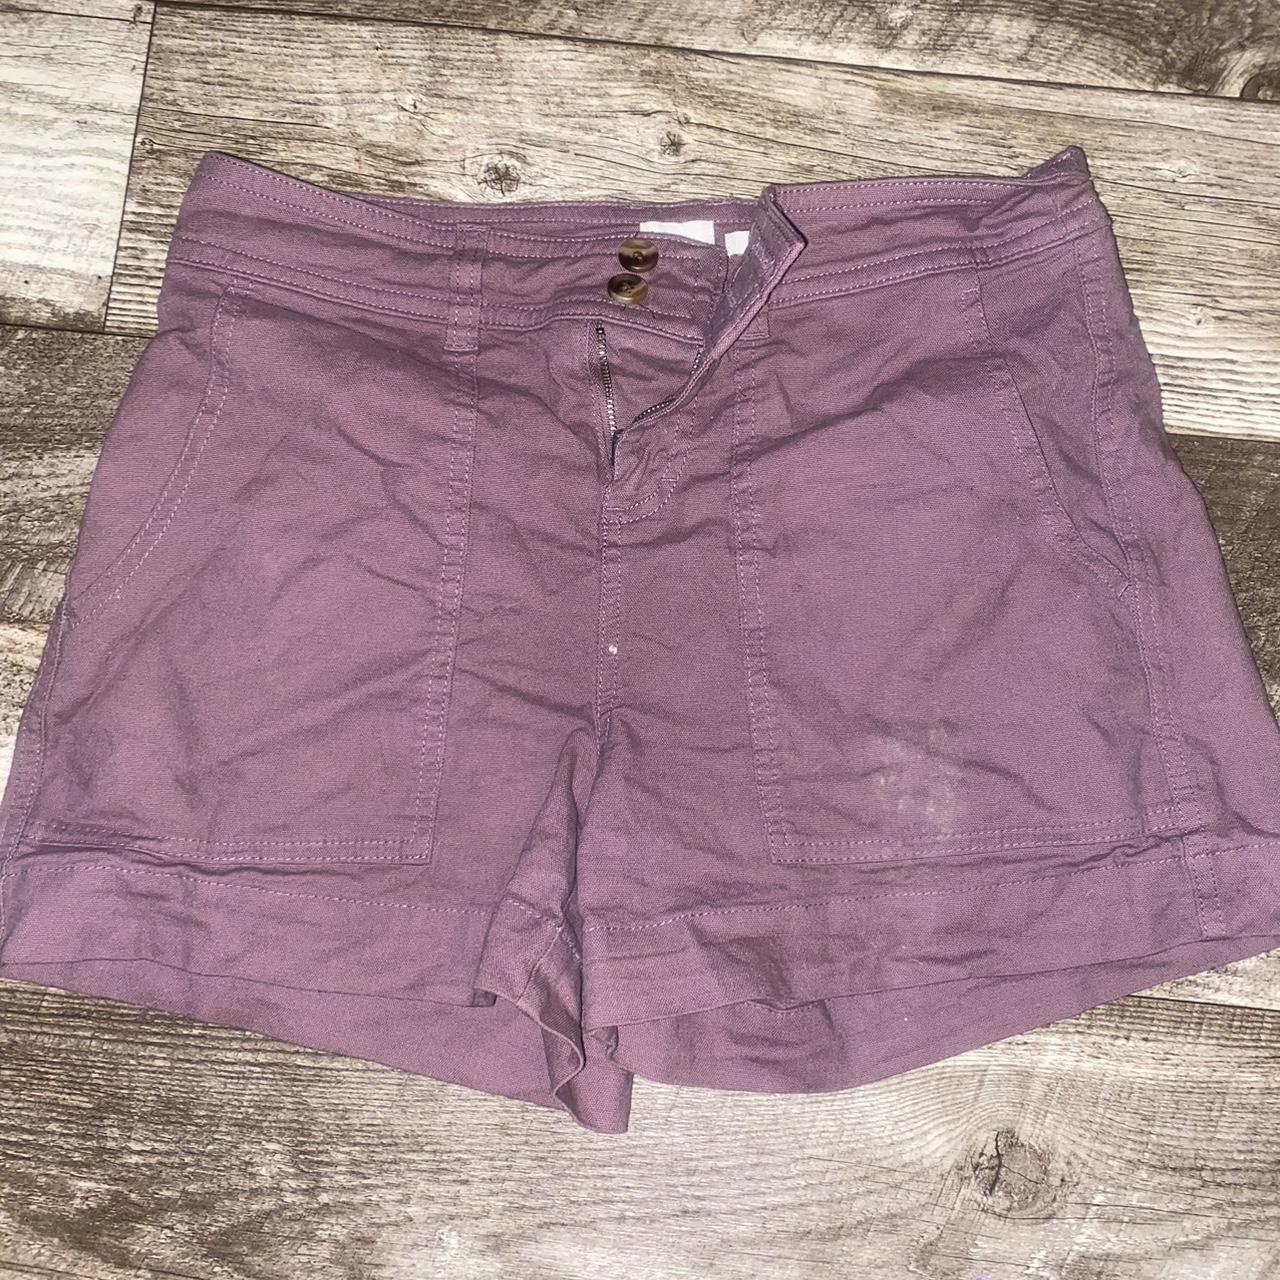 Us Womens Size To Purple Shorts They Will Be Deep Depop